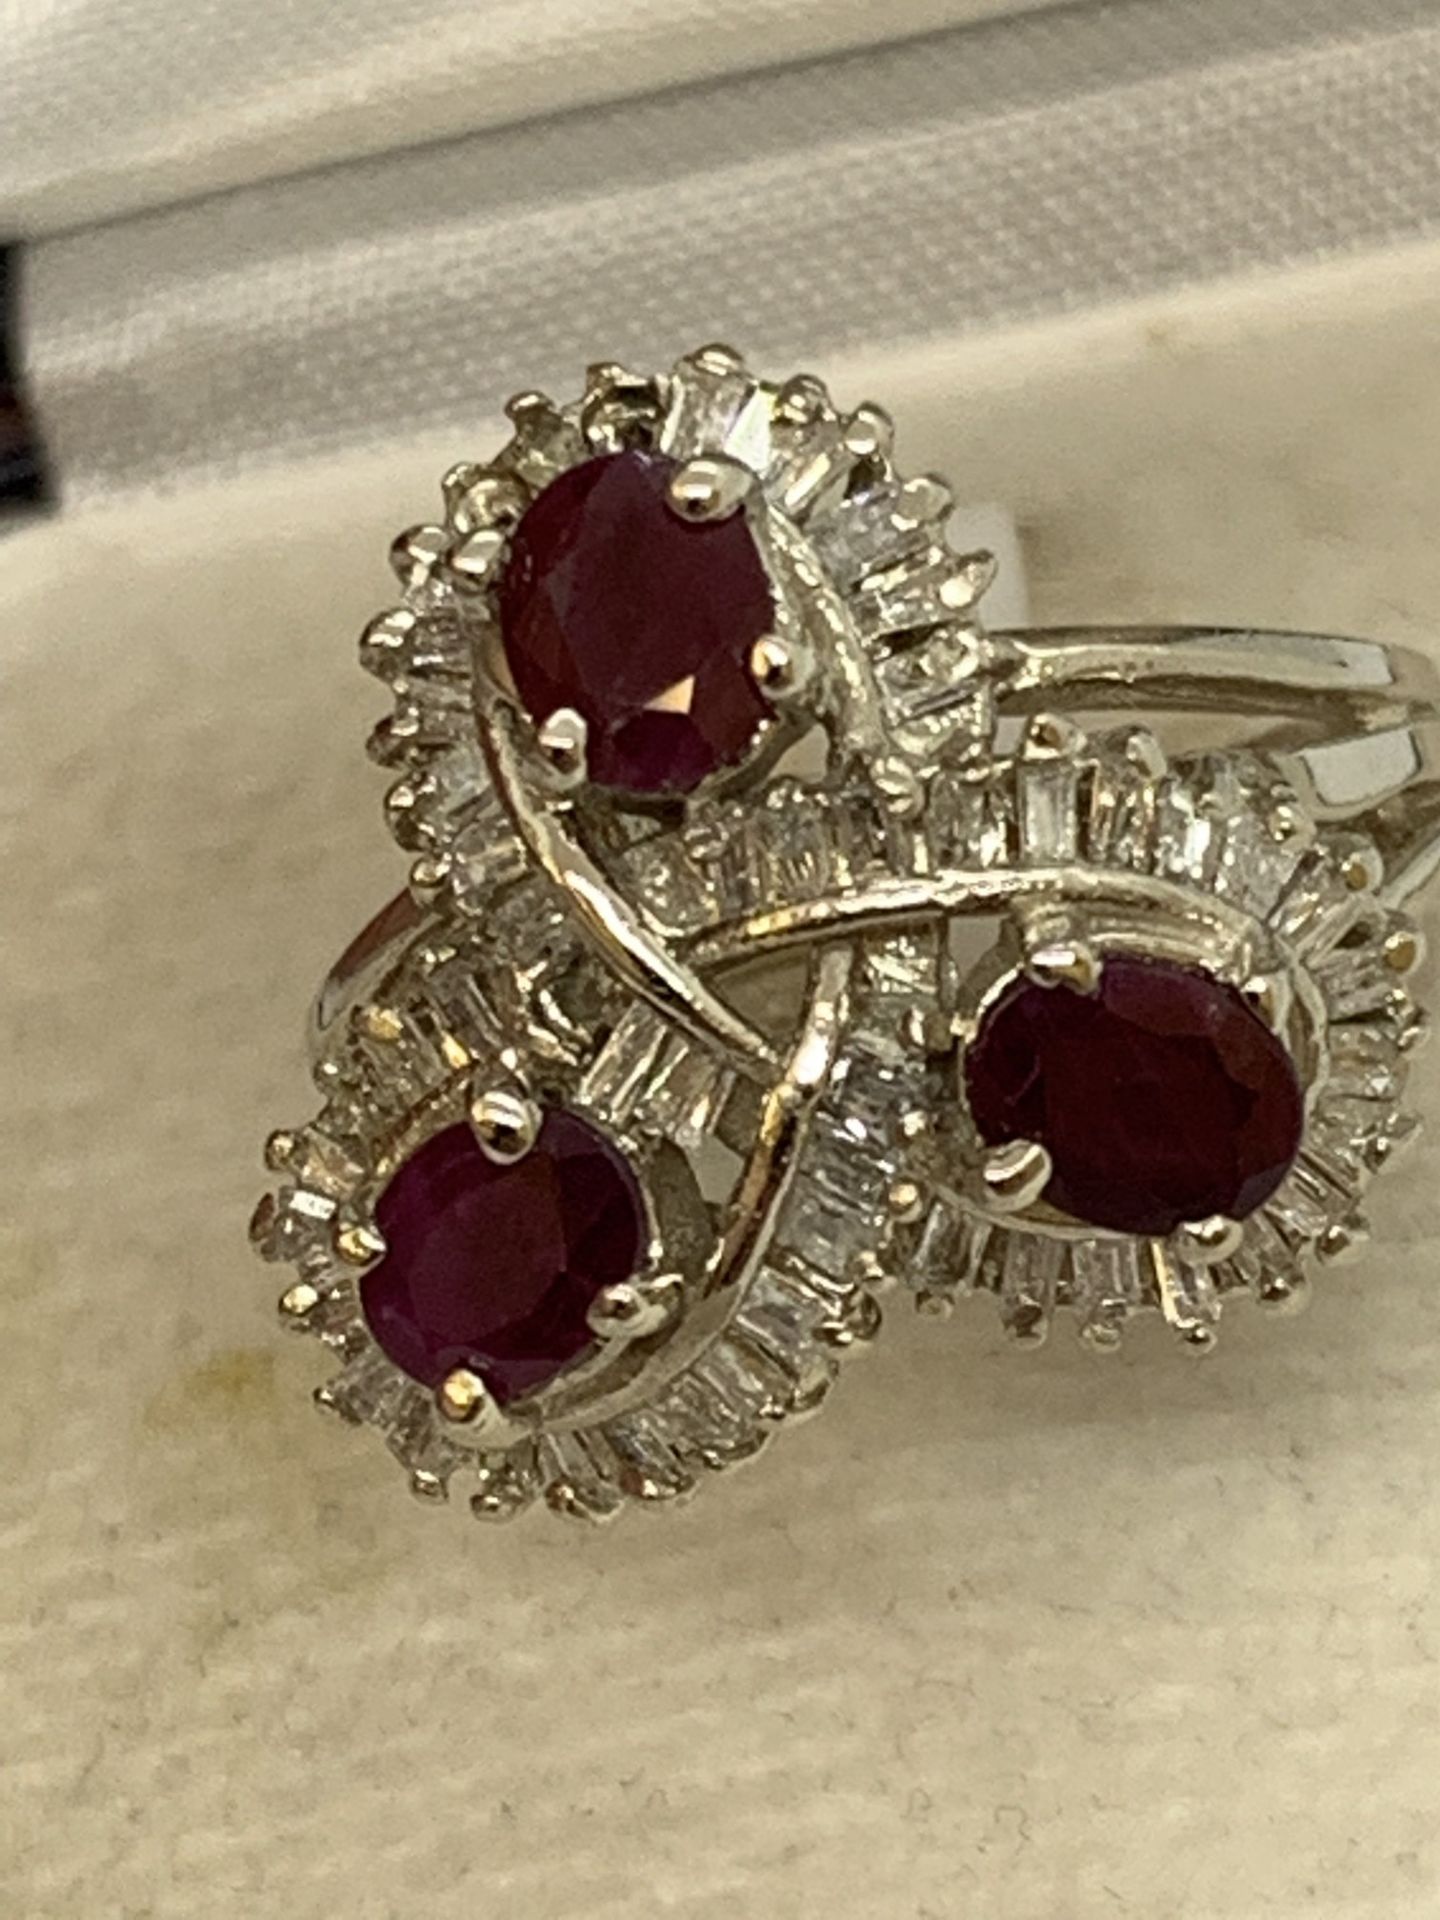 TRIPLE RUBY & DIAMOND SET RING IN 14ct GOLD - 6.8g APPROX - SIZE M APPROX - Image 6 of 8